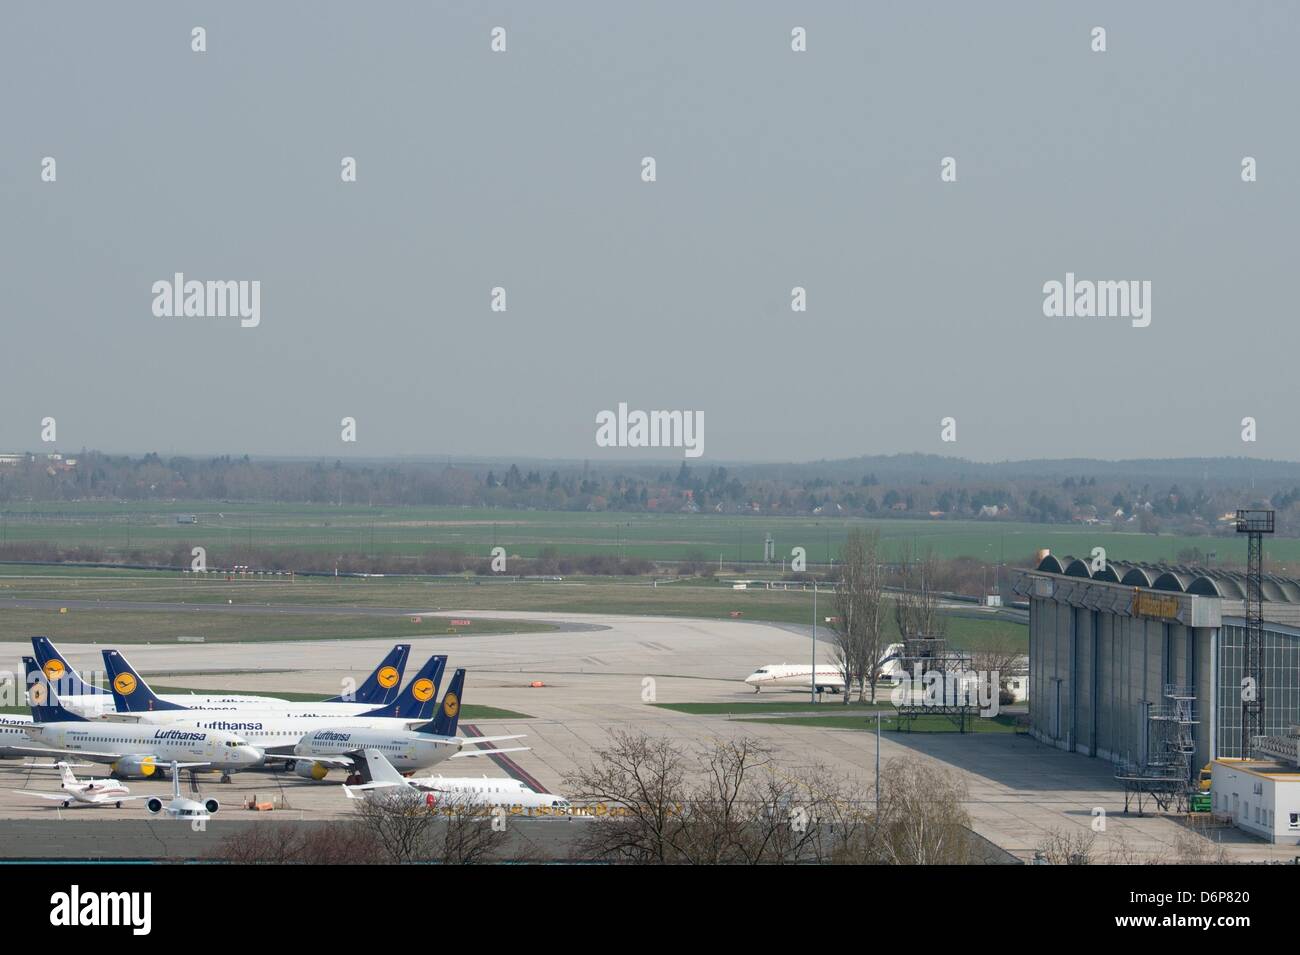 Air planes of the airline Lufthansa park on the runway of the airport in Schoenefeld, Germany, 22 April 2013. It is the second round of strikes, initiated as reaction to an ongoing collective bargaining and negotiations on labor conditions of about 33.000 technicians and flight attendants. Photo: Marc Tirl Stock Photo